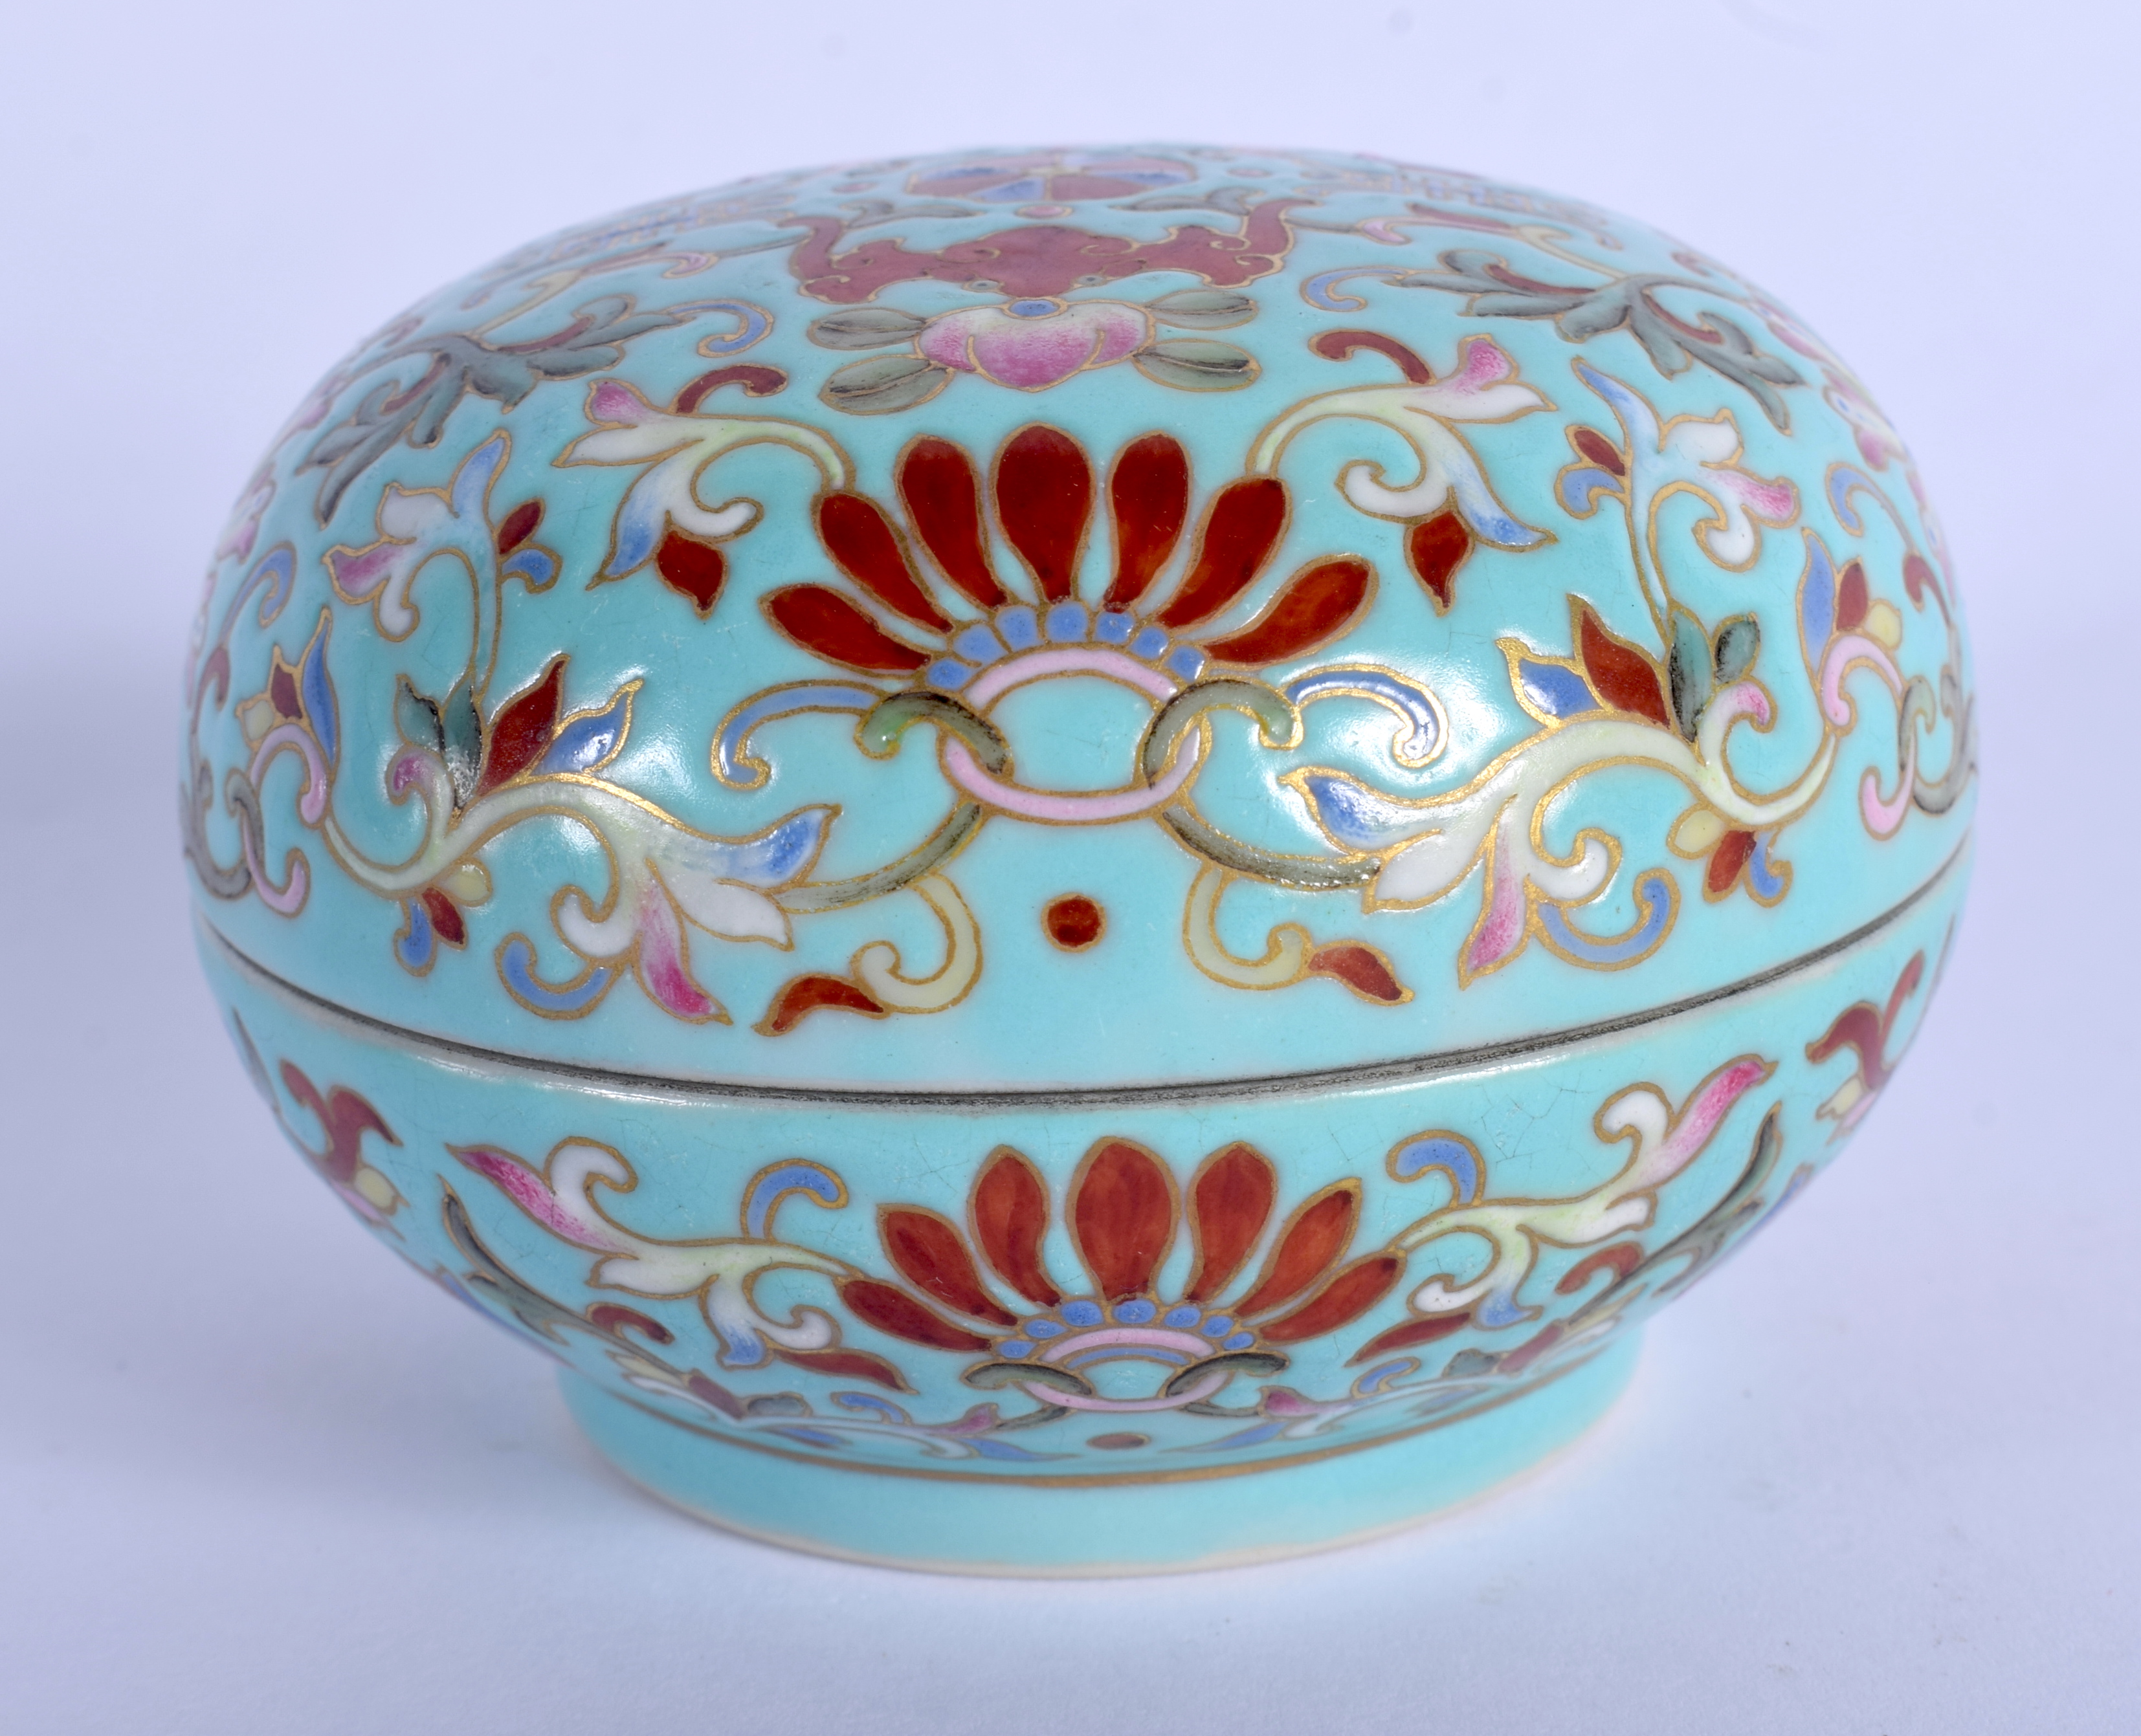 A 19TH CENTURY CHINESE PORCELAIN BOX AND COVER Qing, painted with flowers and vines. 6.75 cm diamete - Image 3 of 5